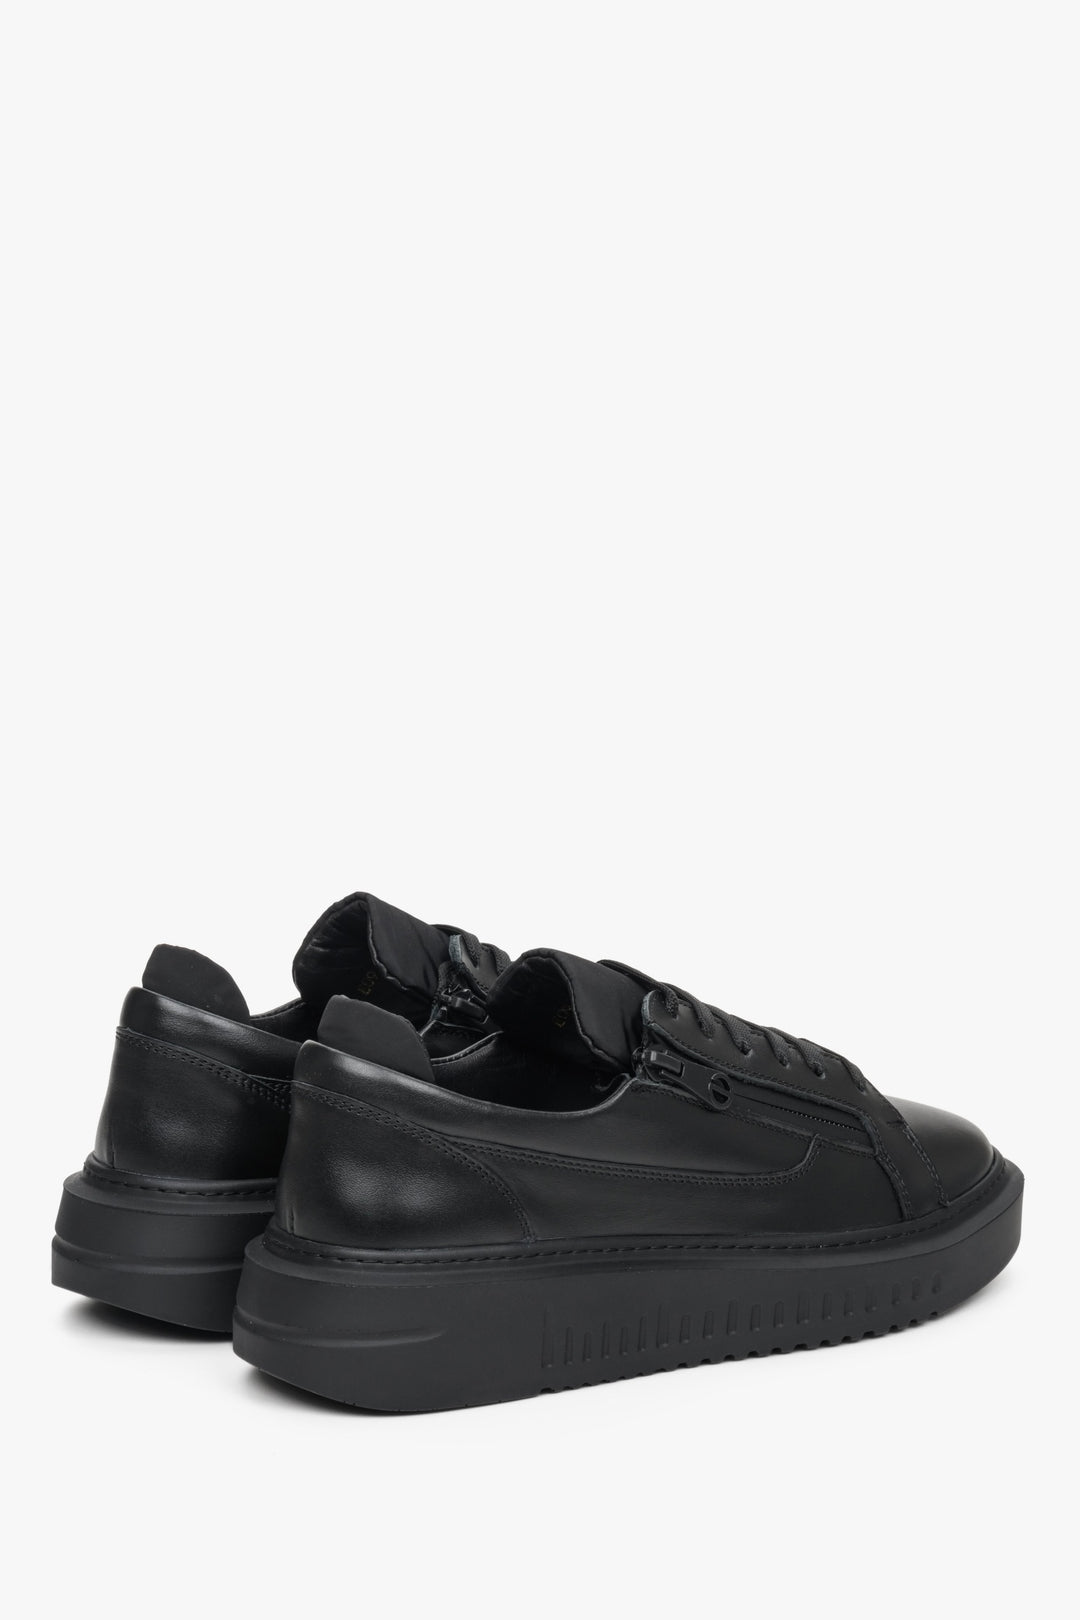 Women's black sneakers made of genuine leather by Estro - presentation of the heel and the side seam.